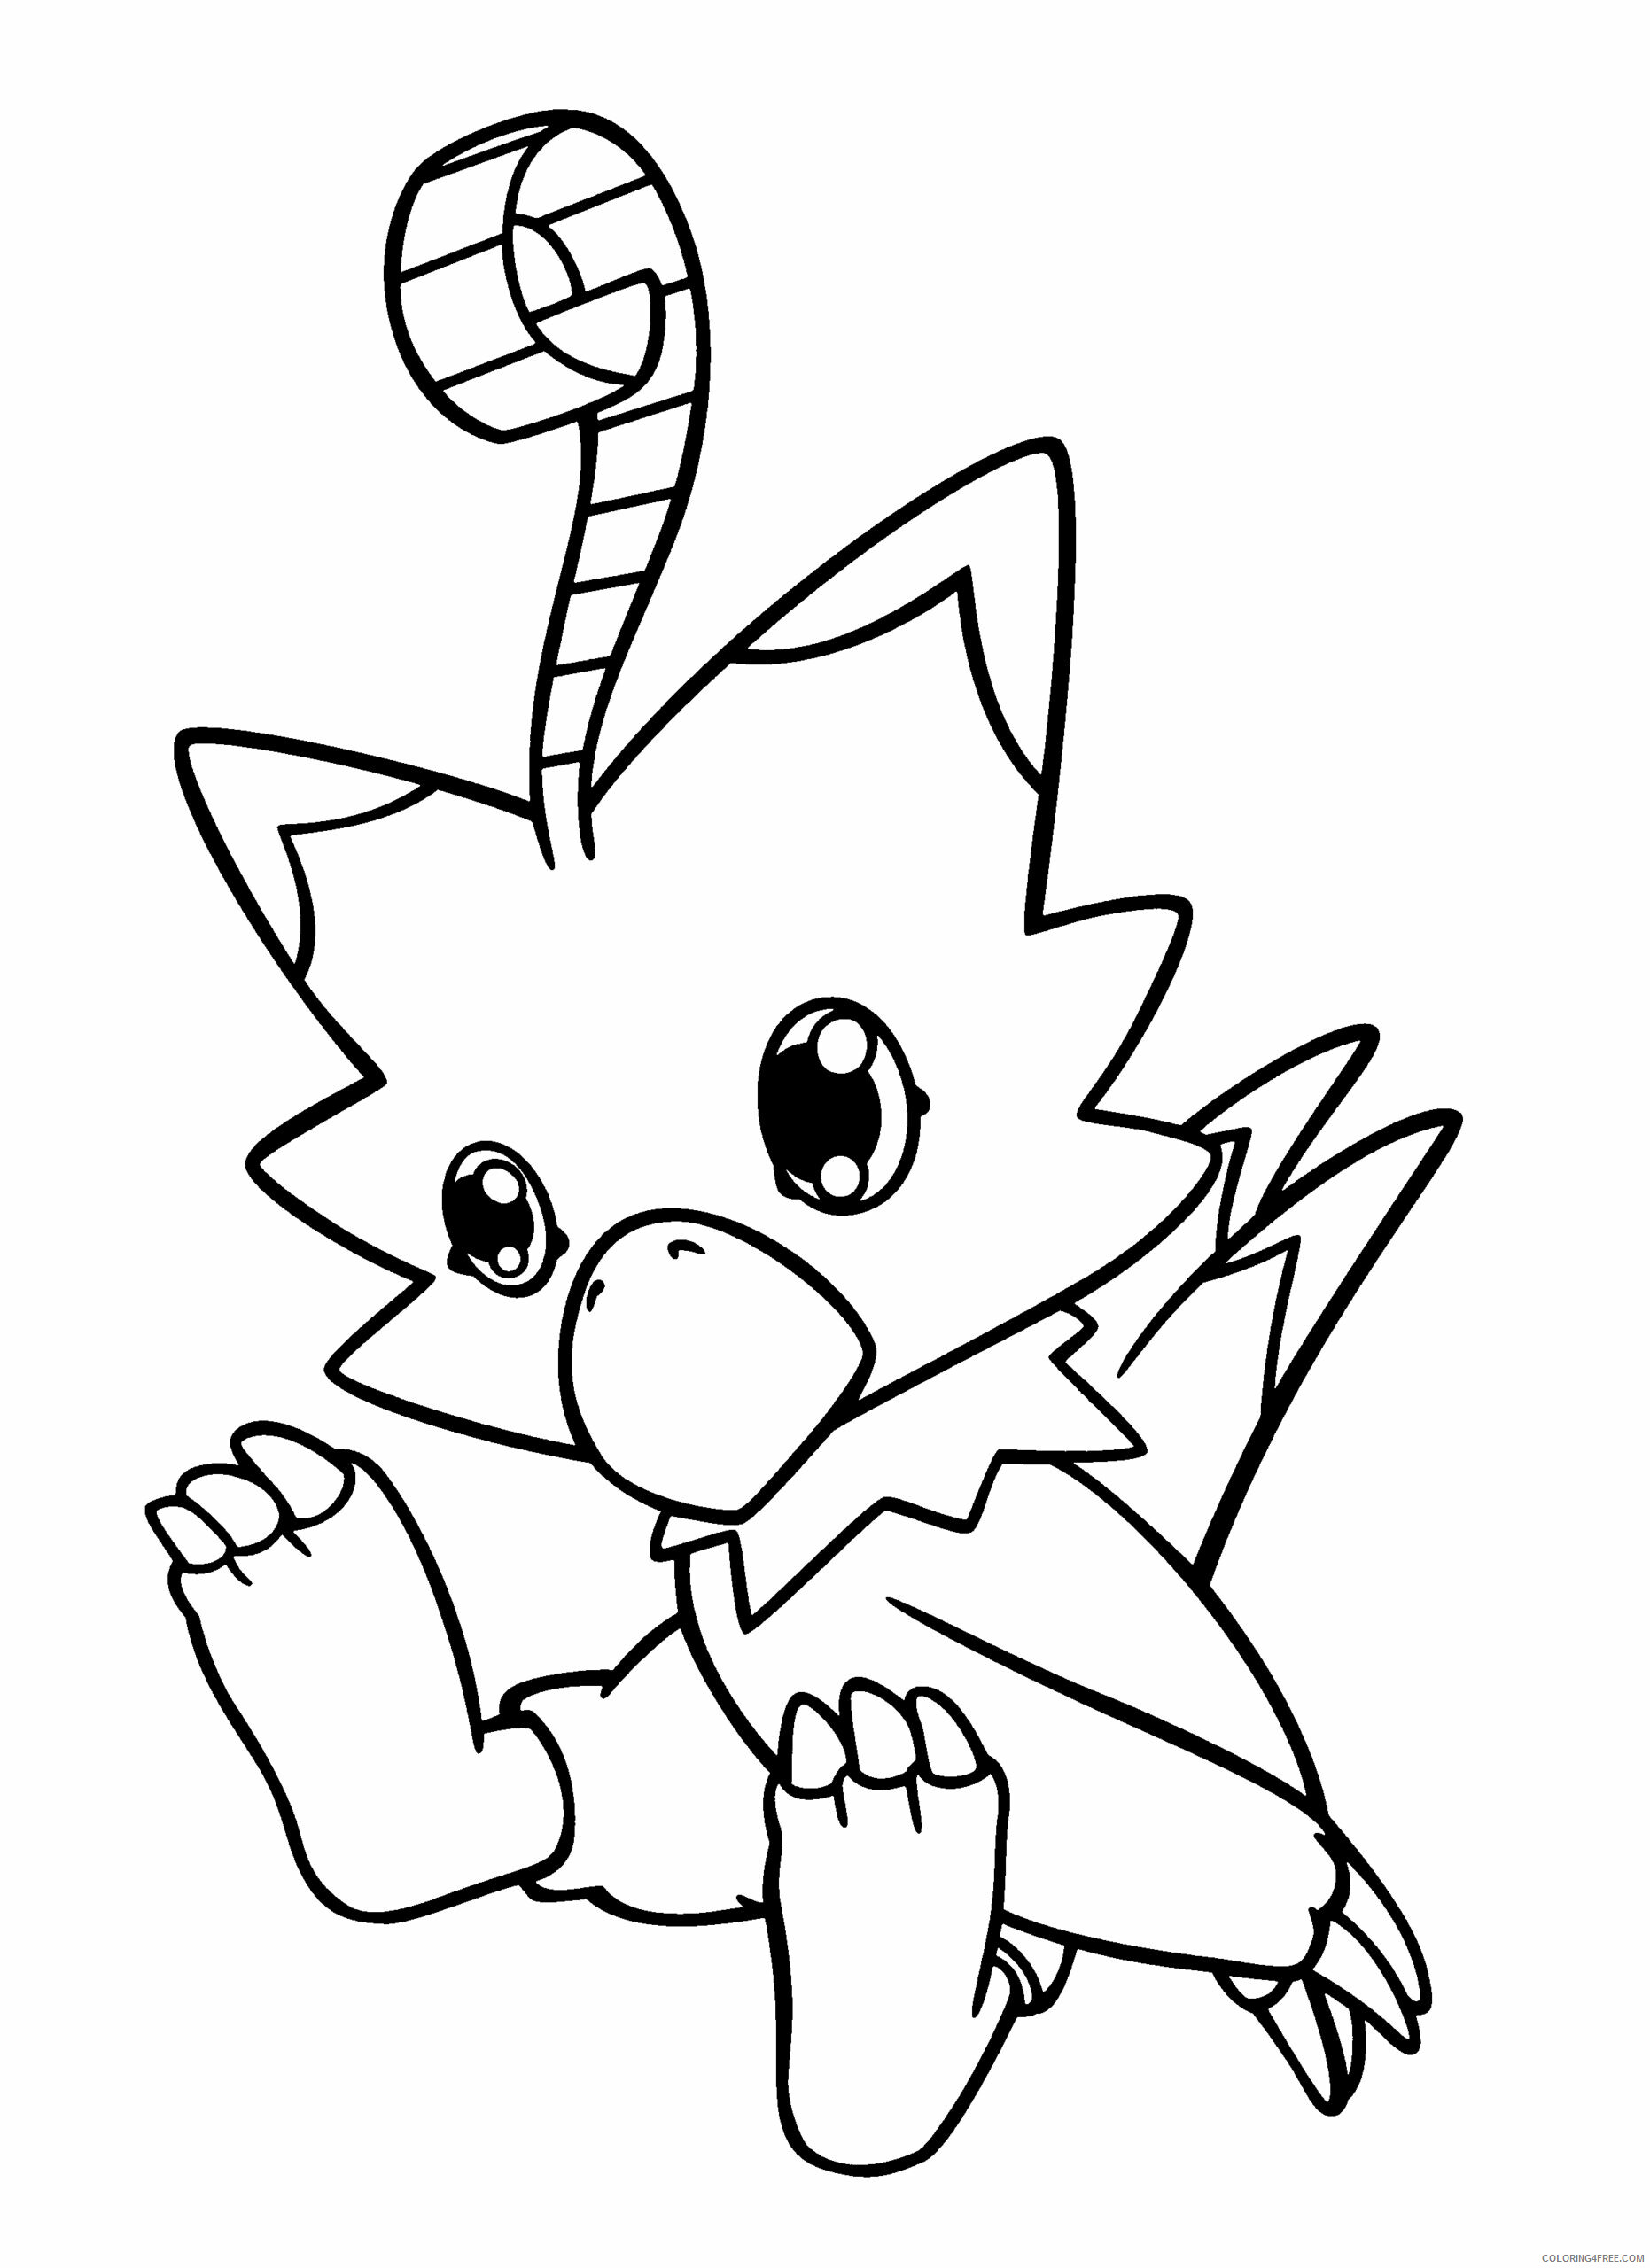 Digimon Printable Coloring Pages Anime digimon UJHXa 2021 0191 Coloring4free